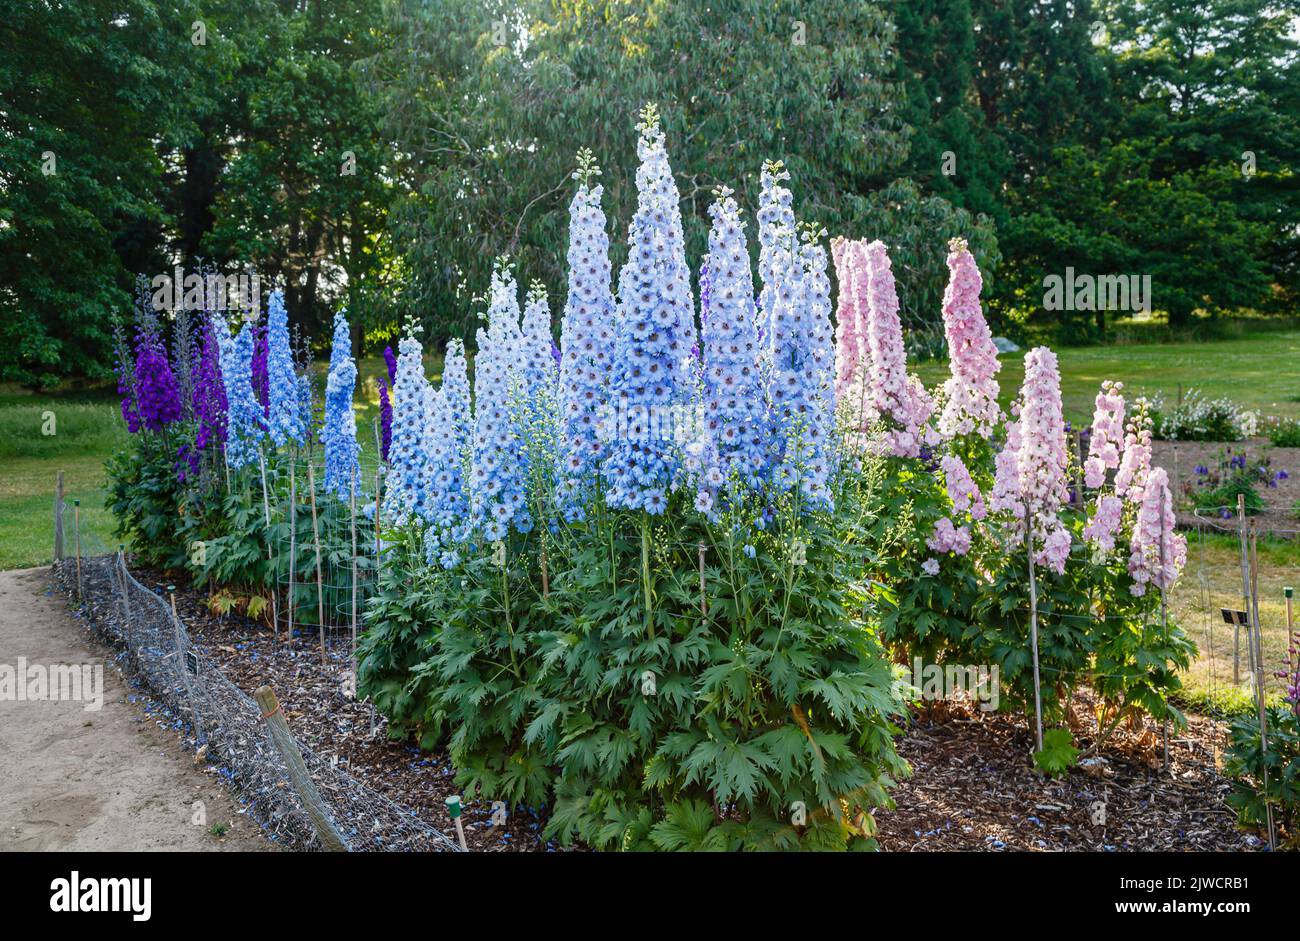 Tall spikes of light blue delphinium 'Raymond Lister' flowering in the Trails Field at RHS Gardens, Wisley, Surrey, south-east England in summer Stock Photo